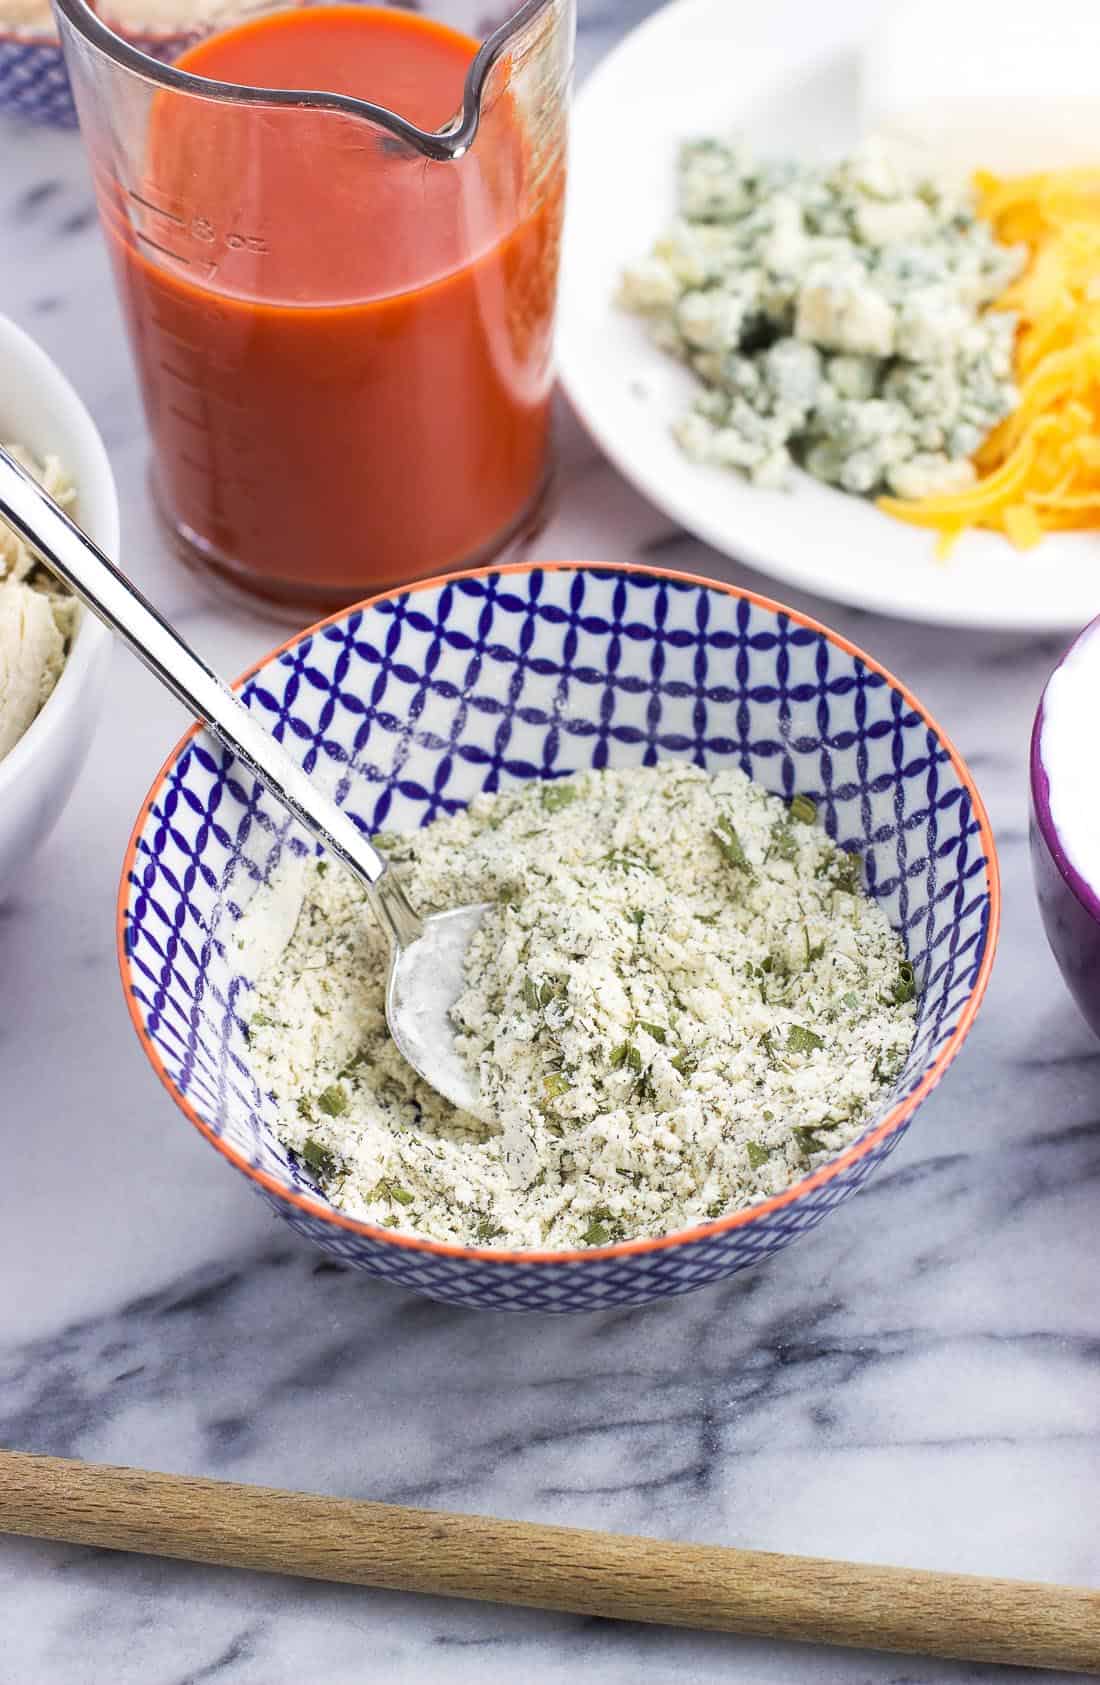 Homemade ranch seasoning in a small bowl with a spoon surrounded by other dip ingredients